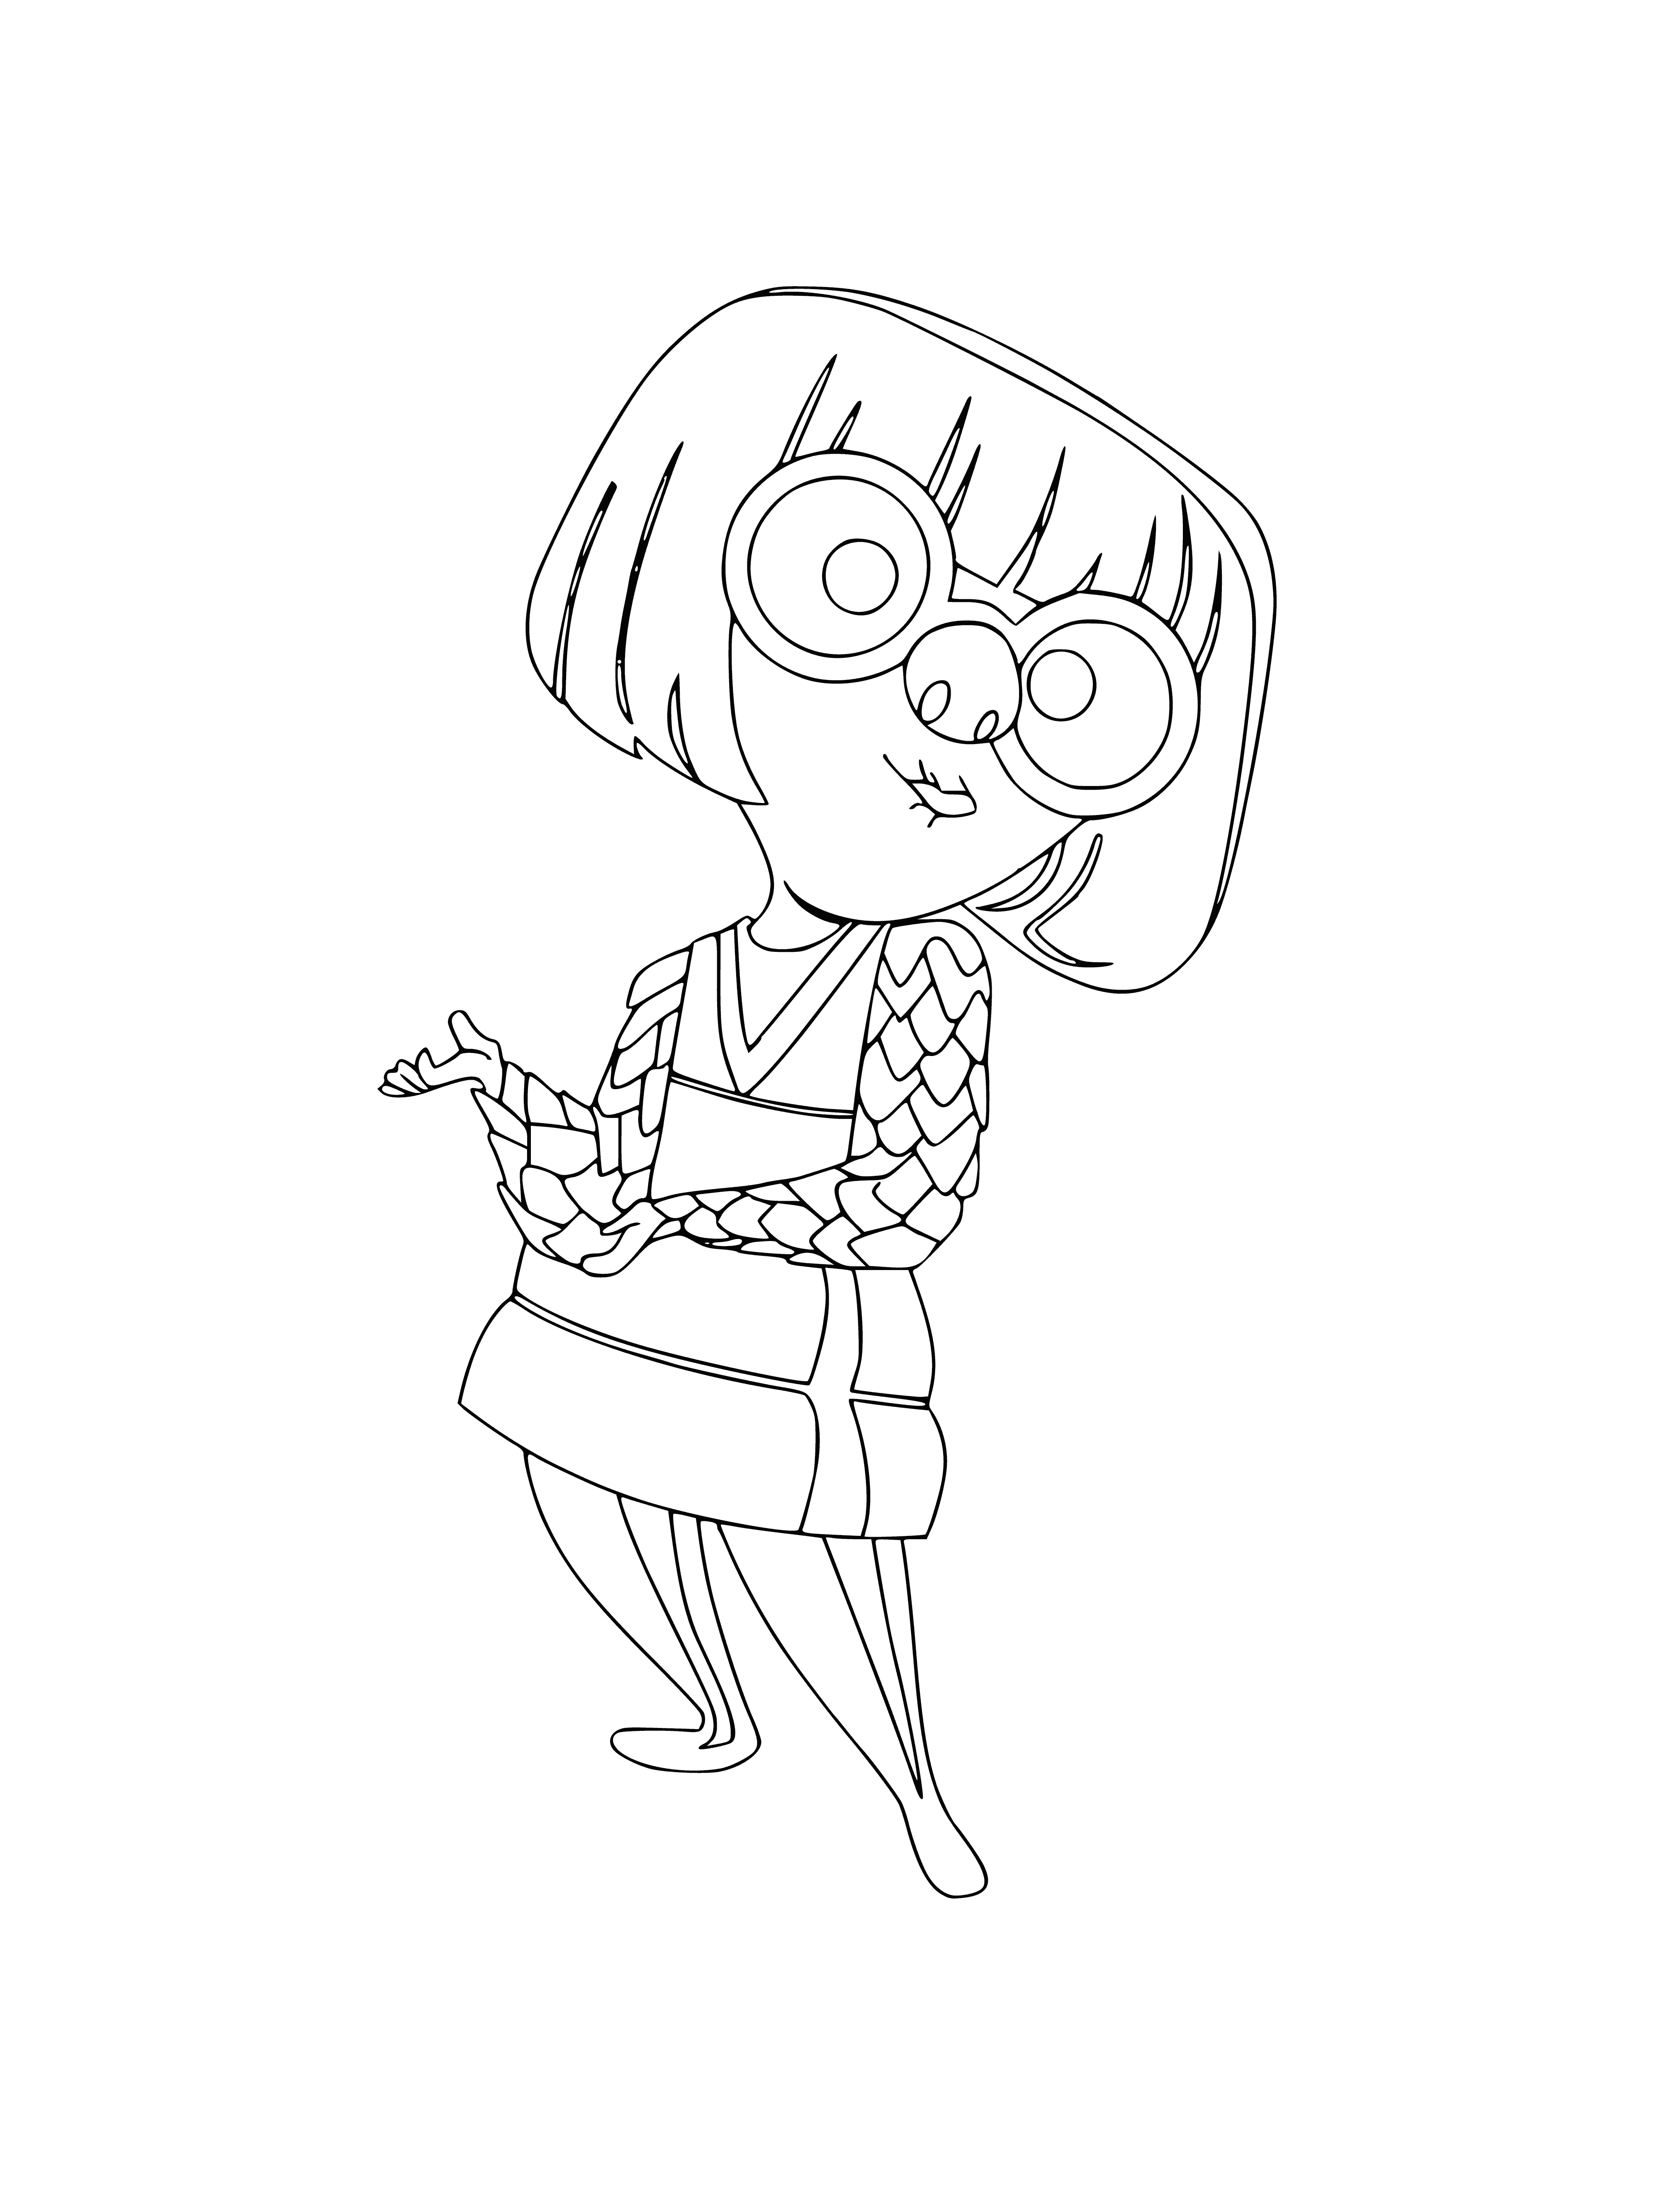 coloring page: Edna Mode from The Incredibles is coloring paged in a coloring page wearing a black suit and glasses with serious expression.